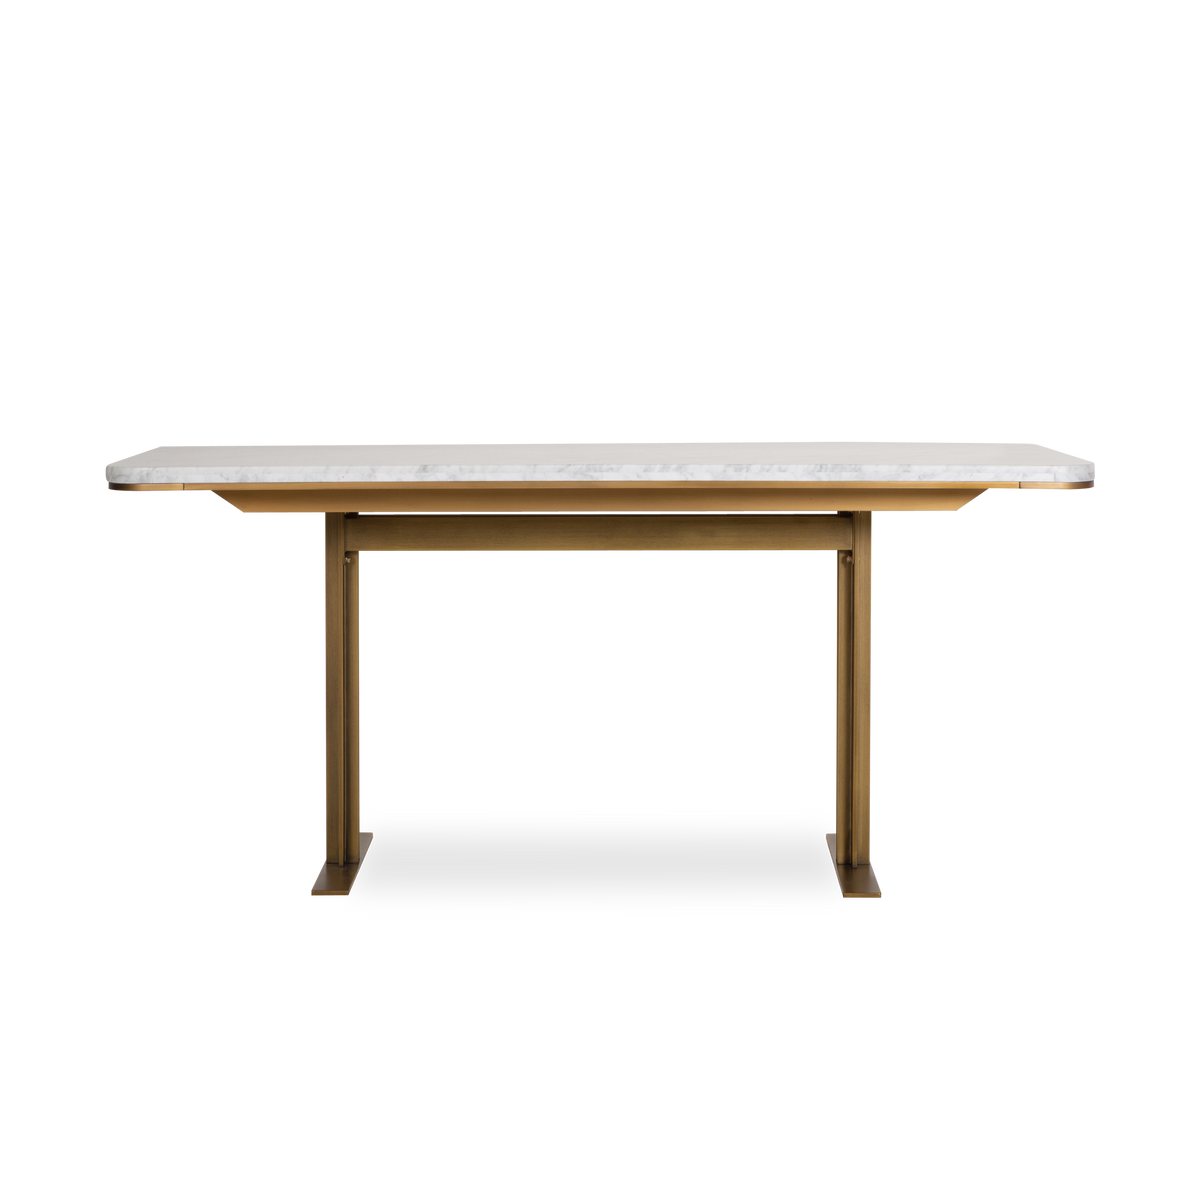 The Prescott Dining Table will bring art deco styling to dining spaces.